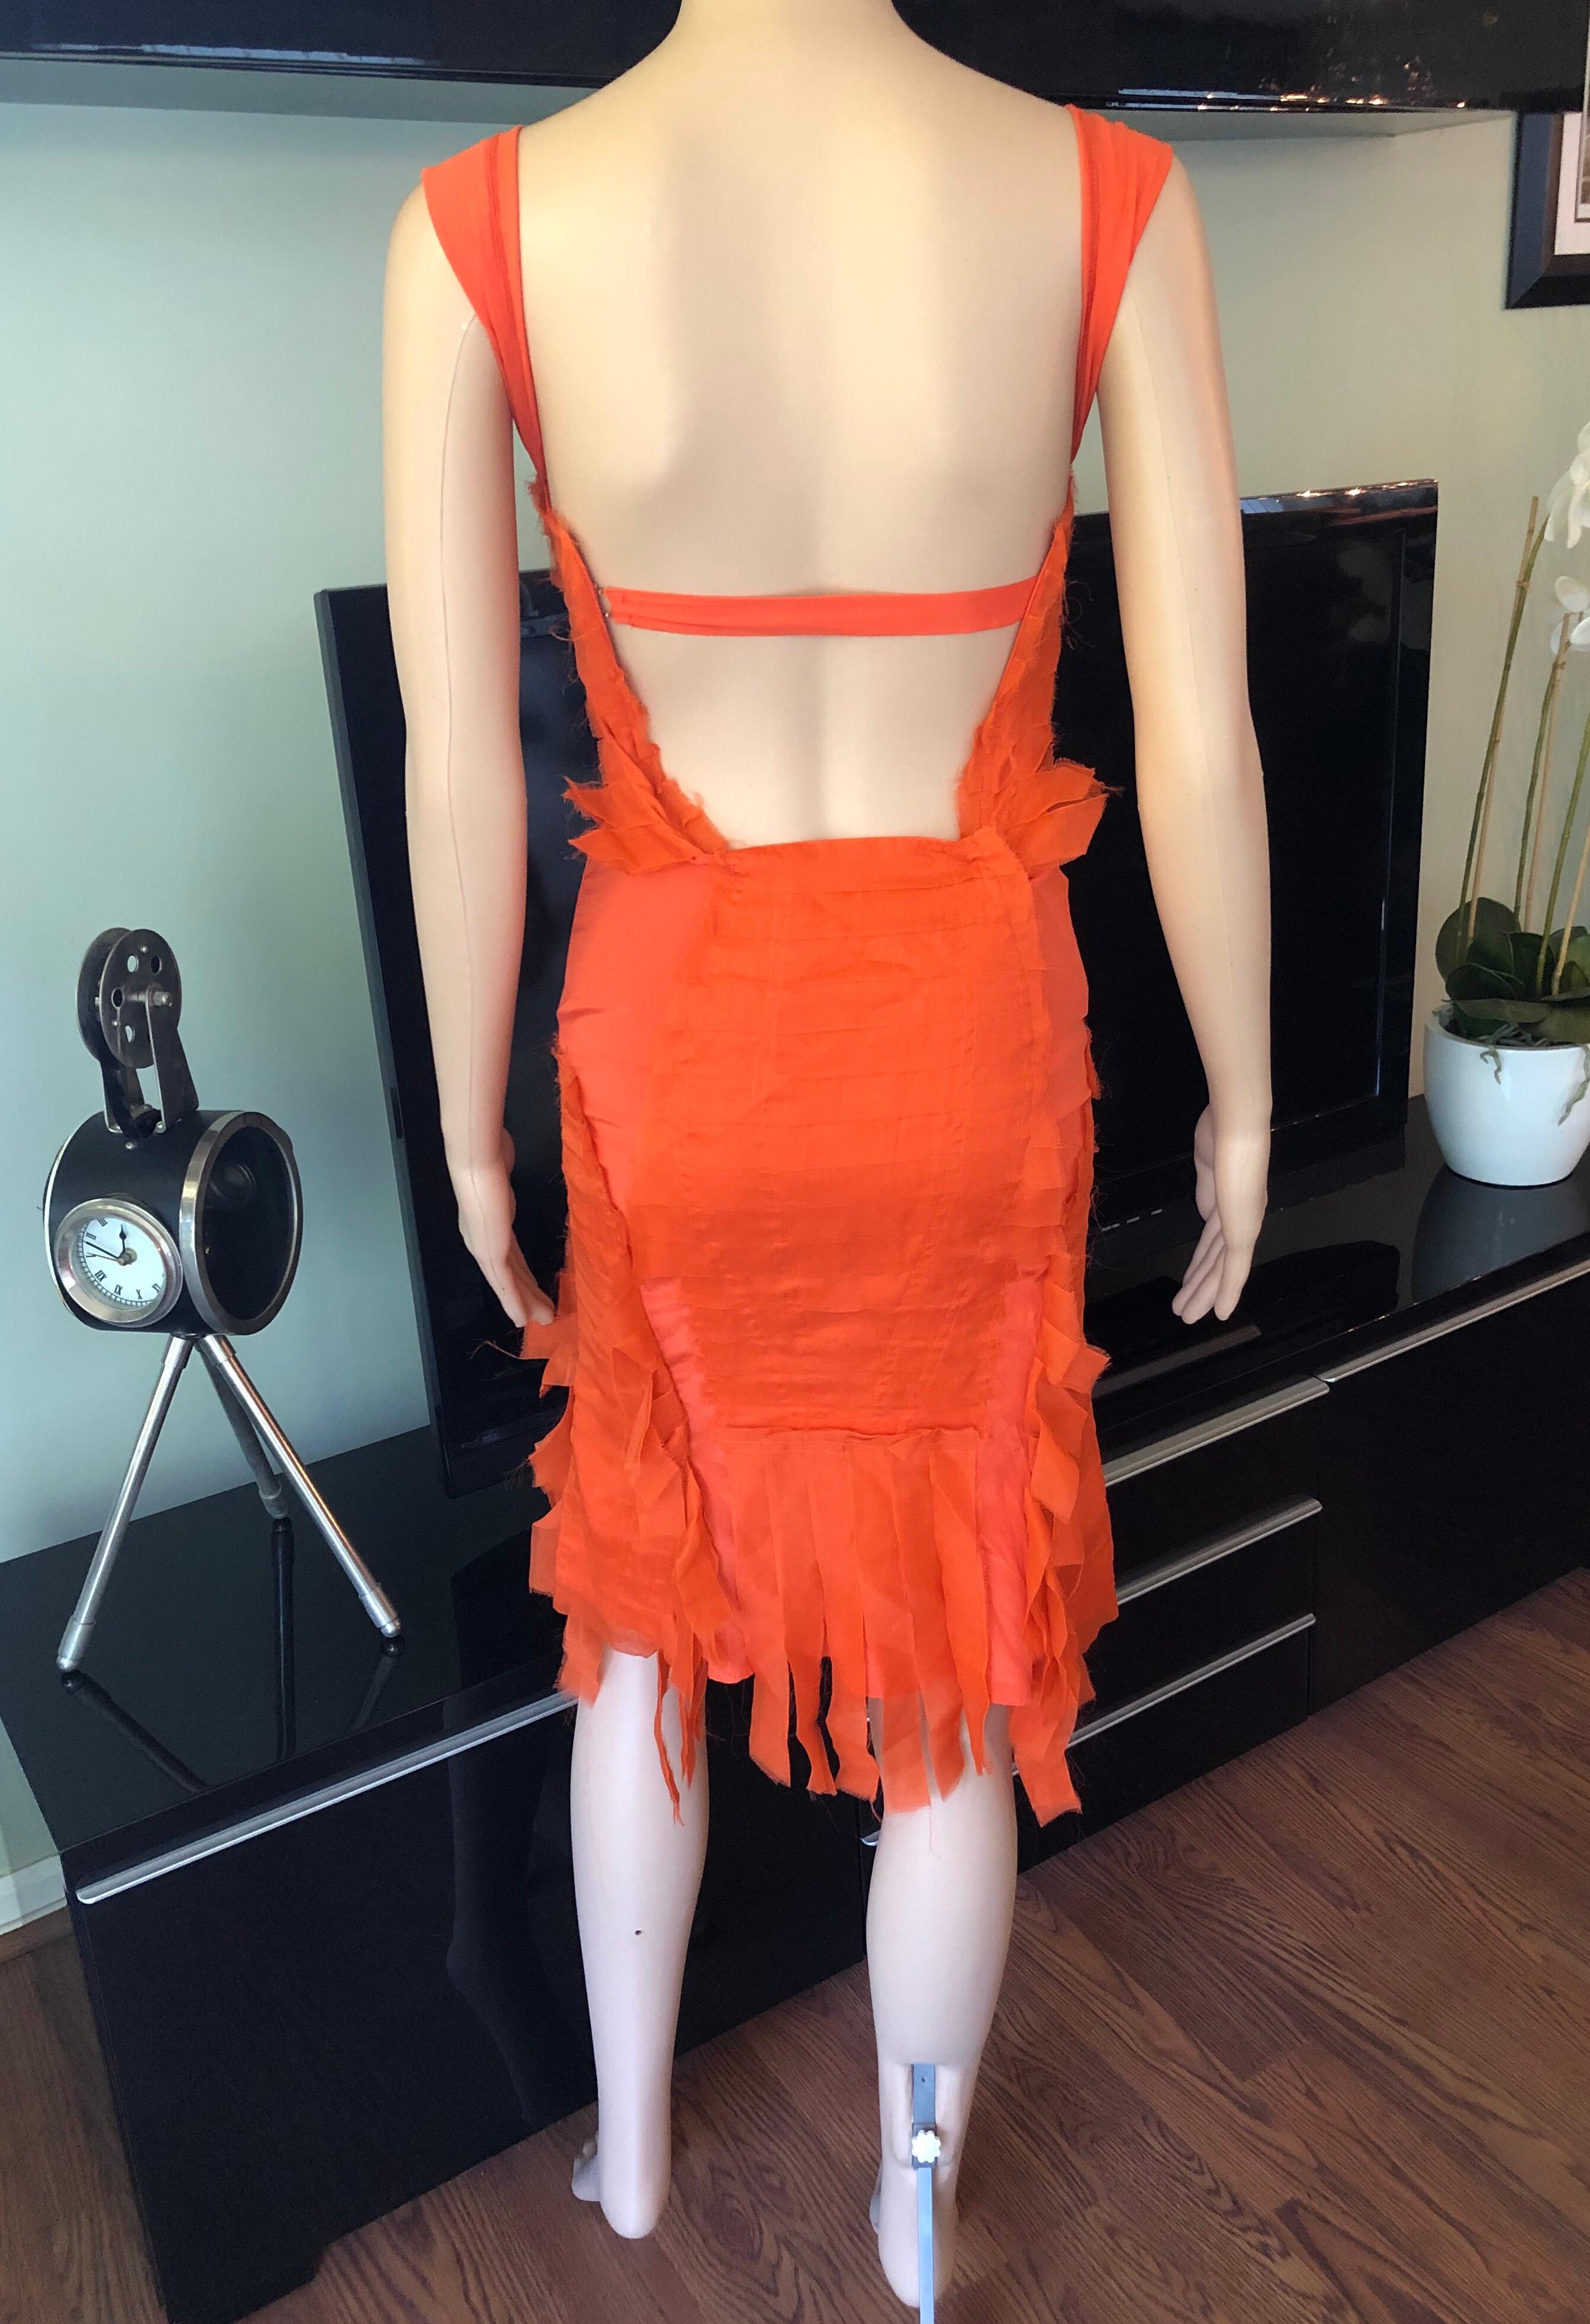 Gucci by Tom Ford S/S 2004 Runway Bustier Silk Open Back Tangerine Dress IT 38

Gucci stretchy silk dress featuring bustier plunging neckline, fringe trim at hem, frayed detail, open back with hook-and-eye closures and concealed zip closure at side.